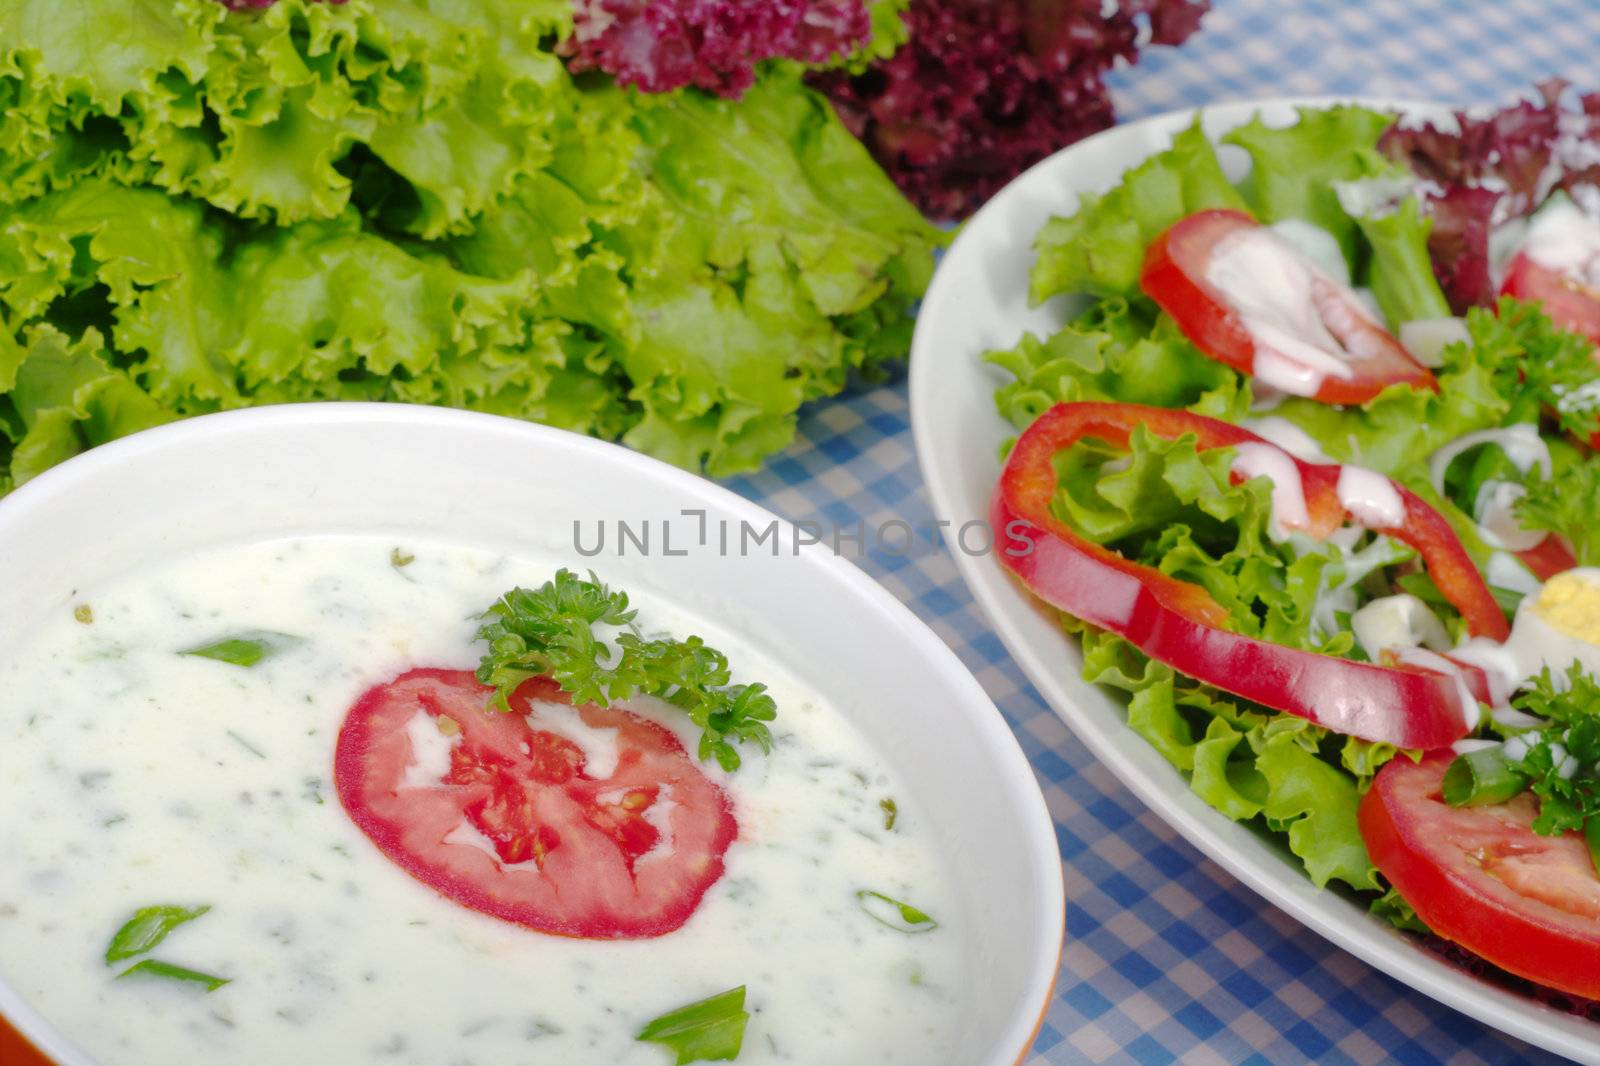 Yoghurt Salad Dressing out of Garlic, Oregano, Salt and Pepper, decorated with Tomate and Parsley with a Salad and Lettuce in the Background